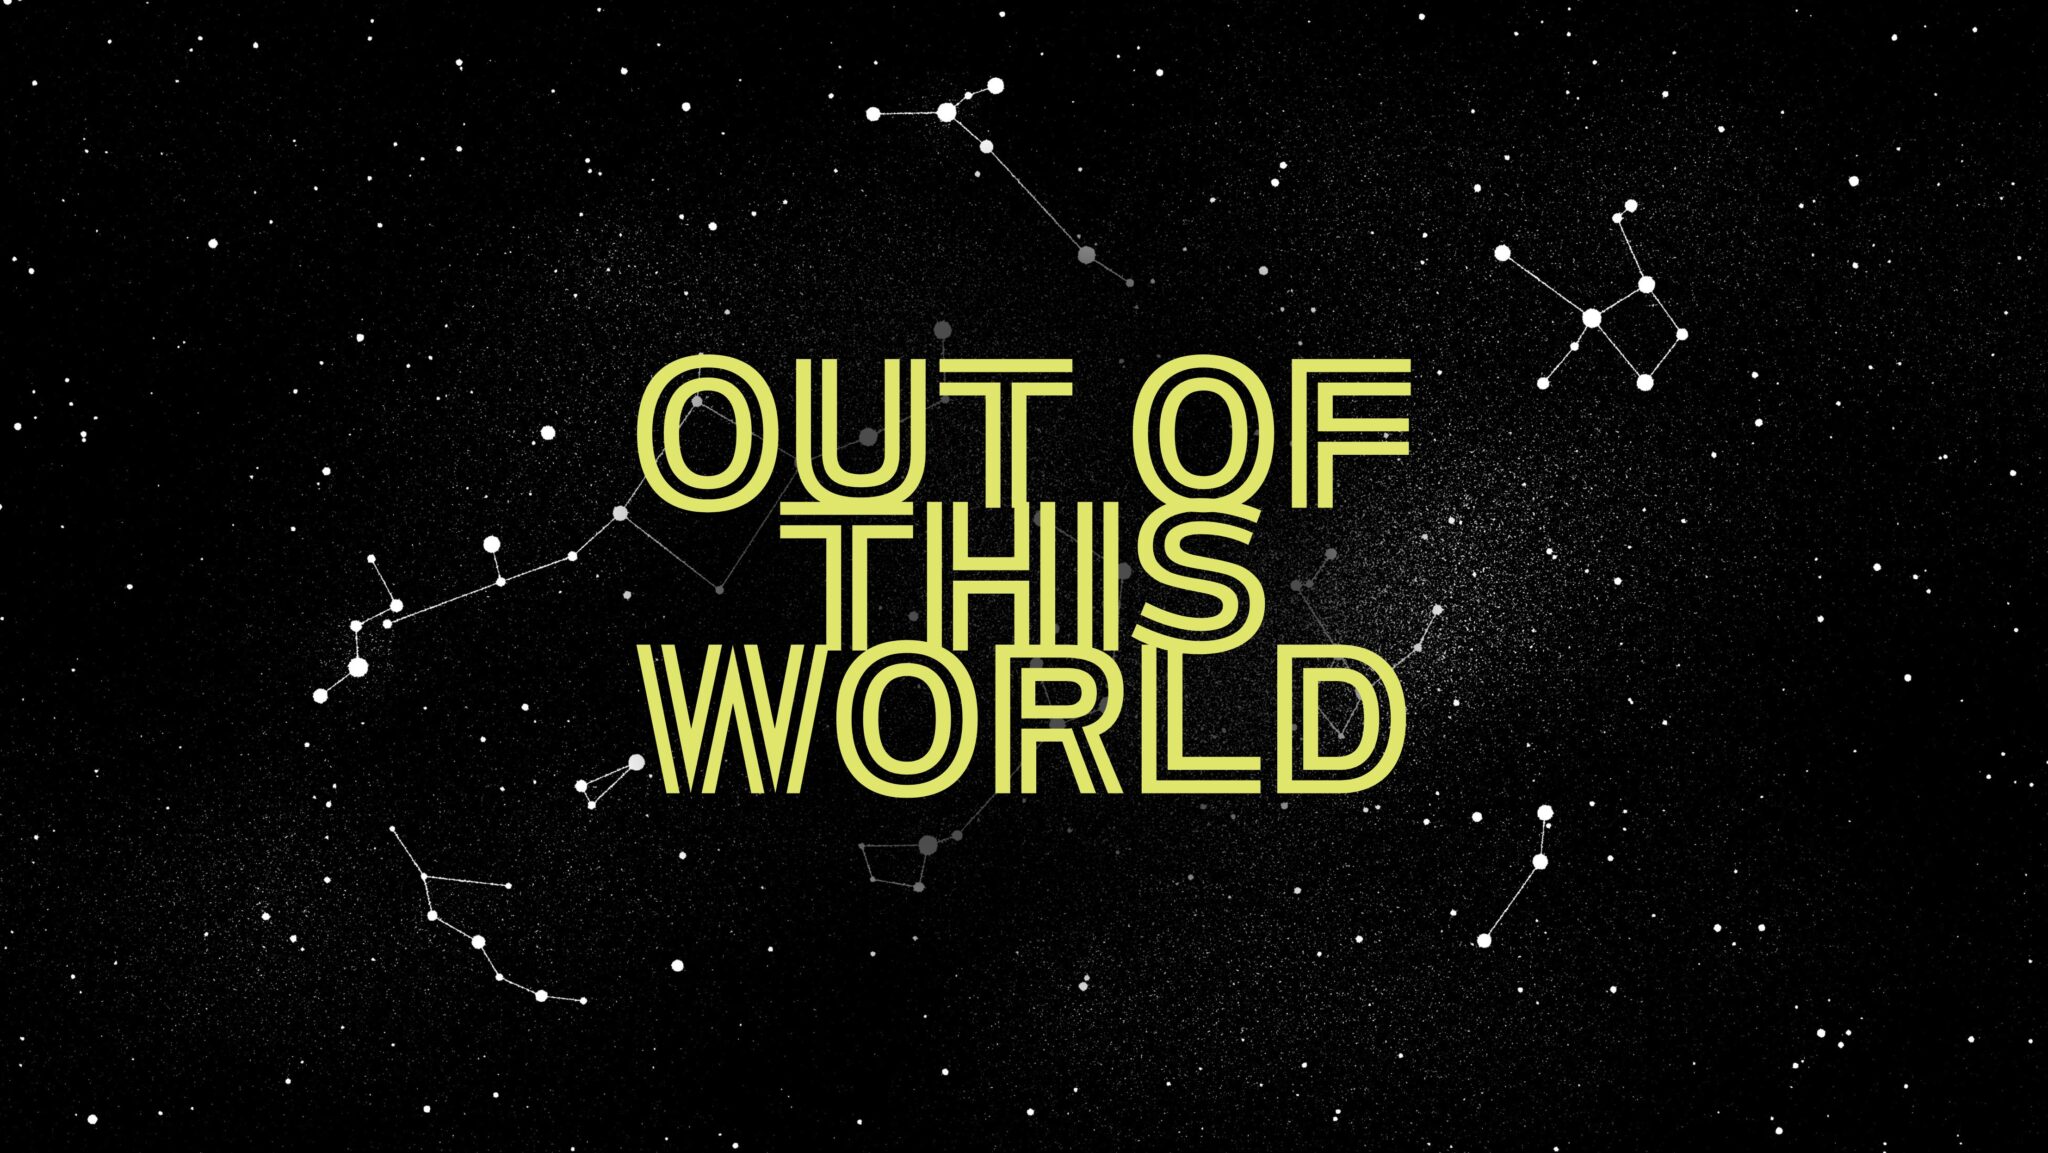 stars and constellations with 'out of this world' written in yellow text